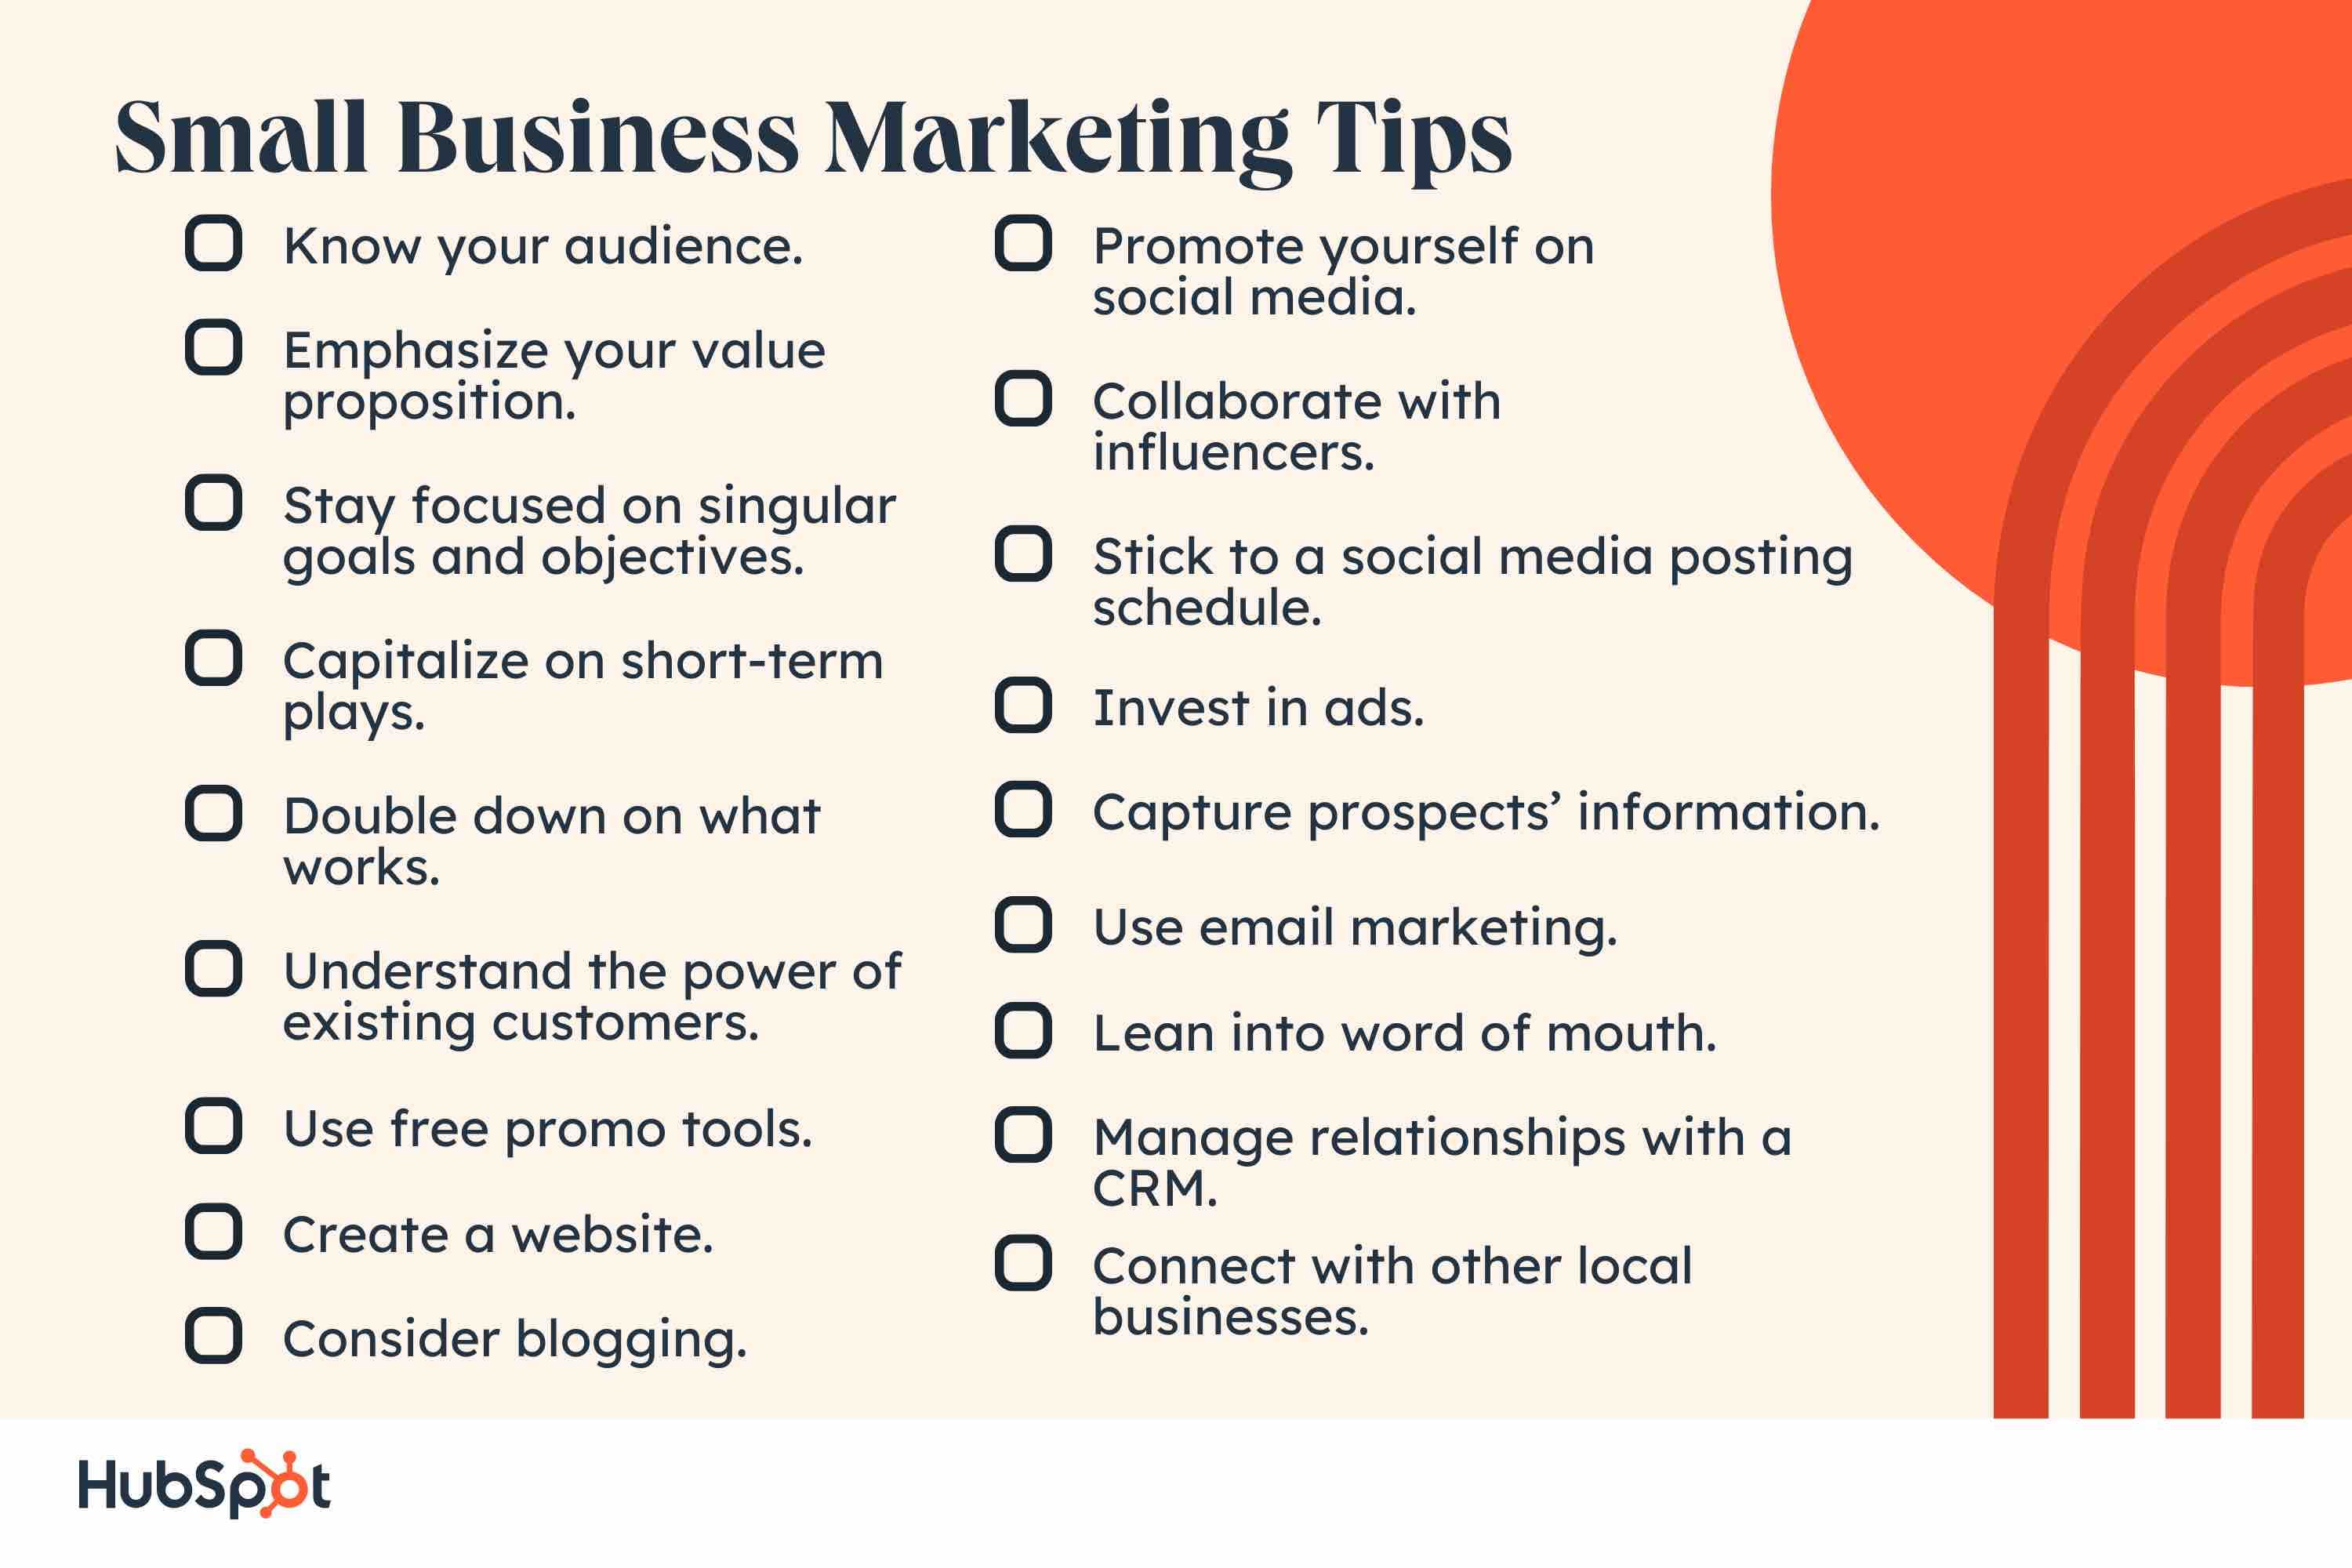 marketing strategies for small businesses